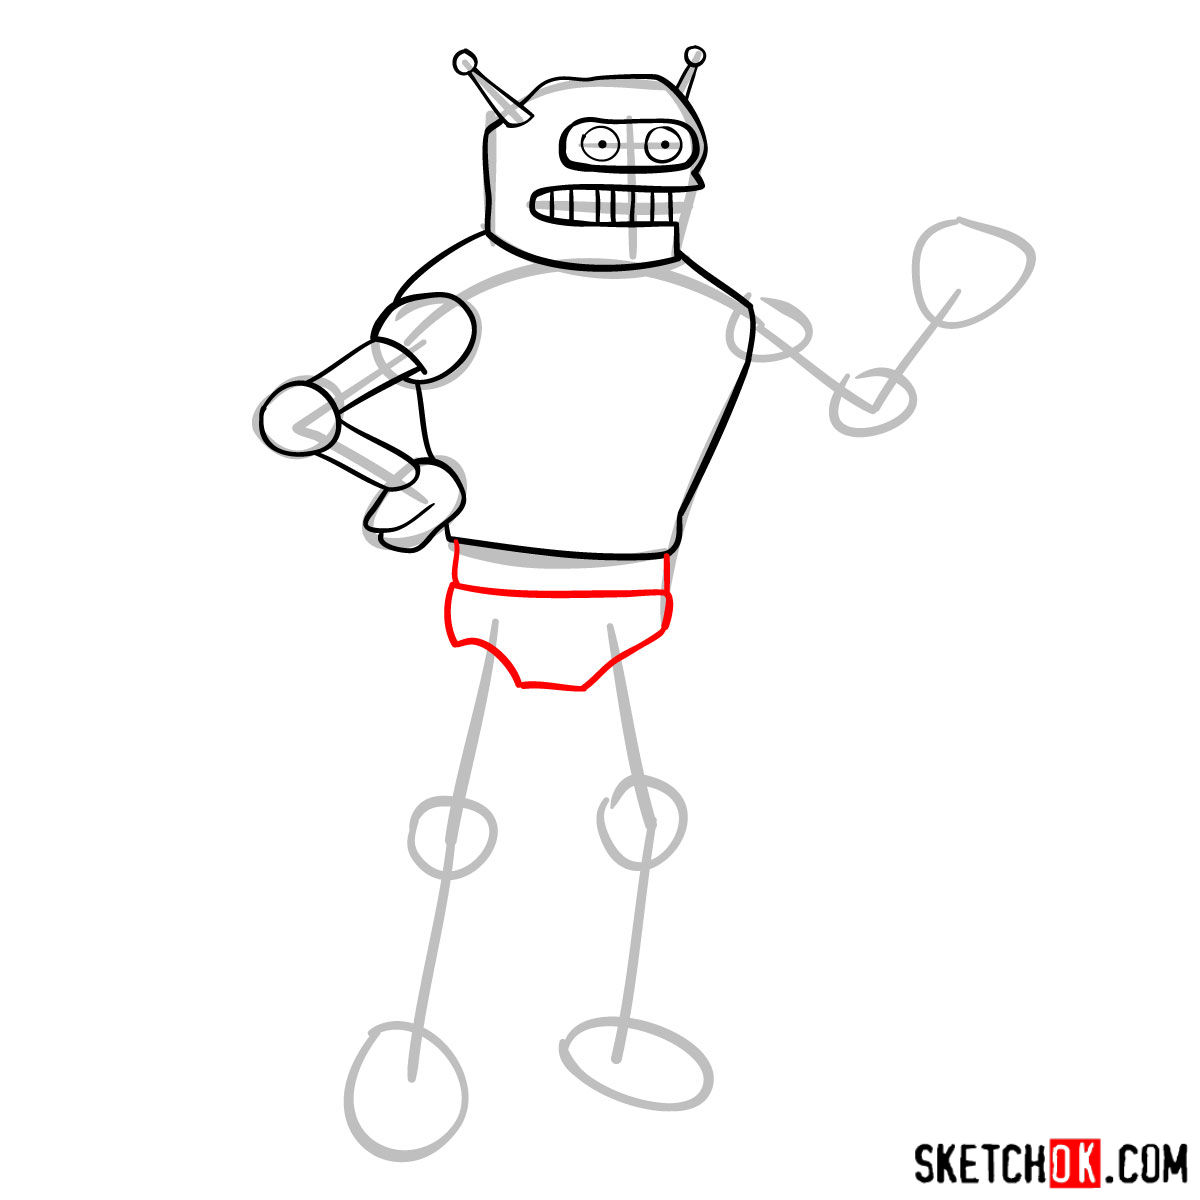 How to draw Calculon from Futurama - step 07